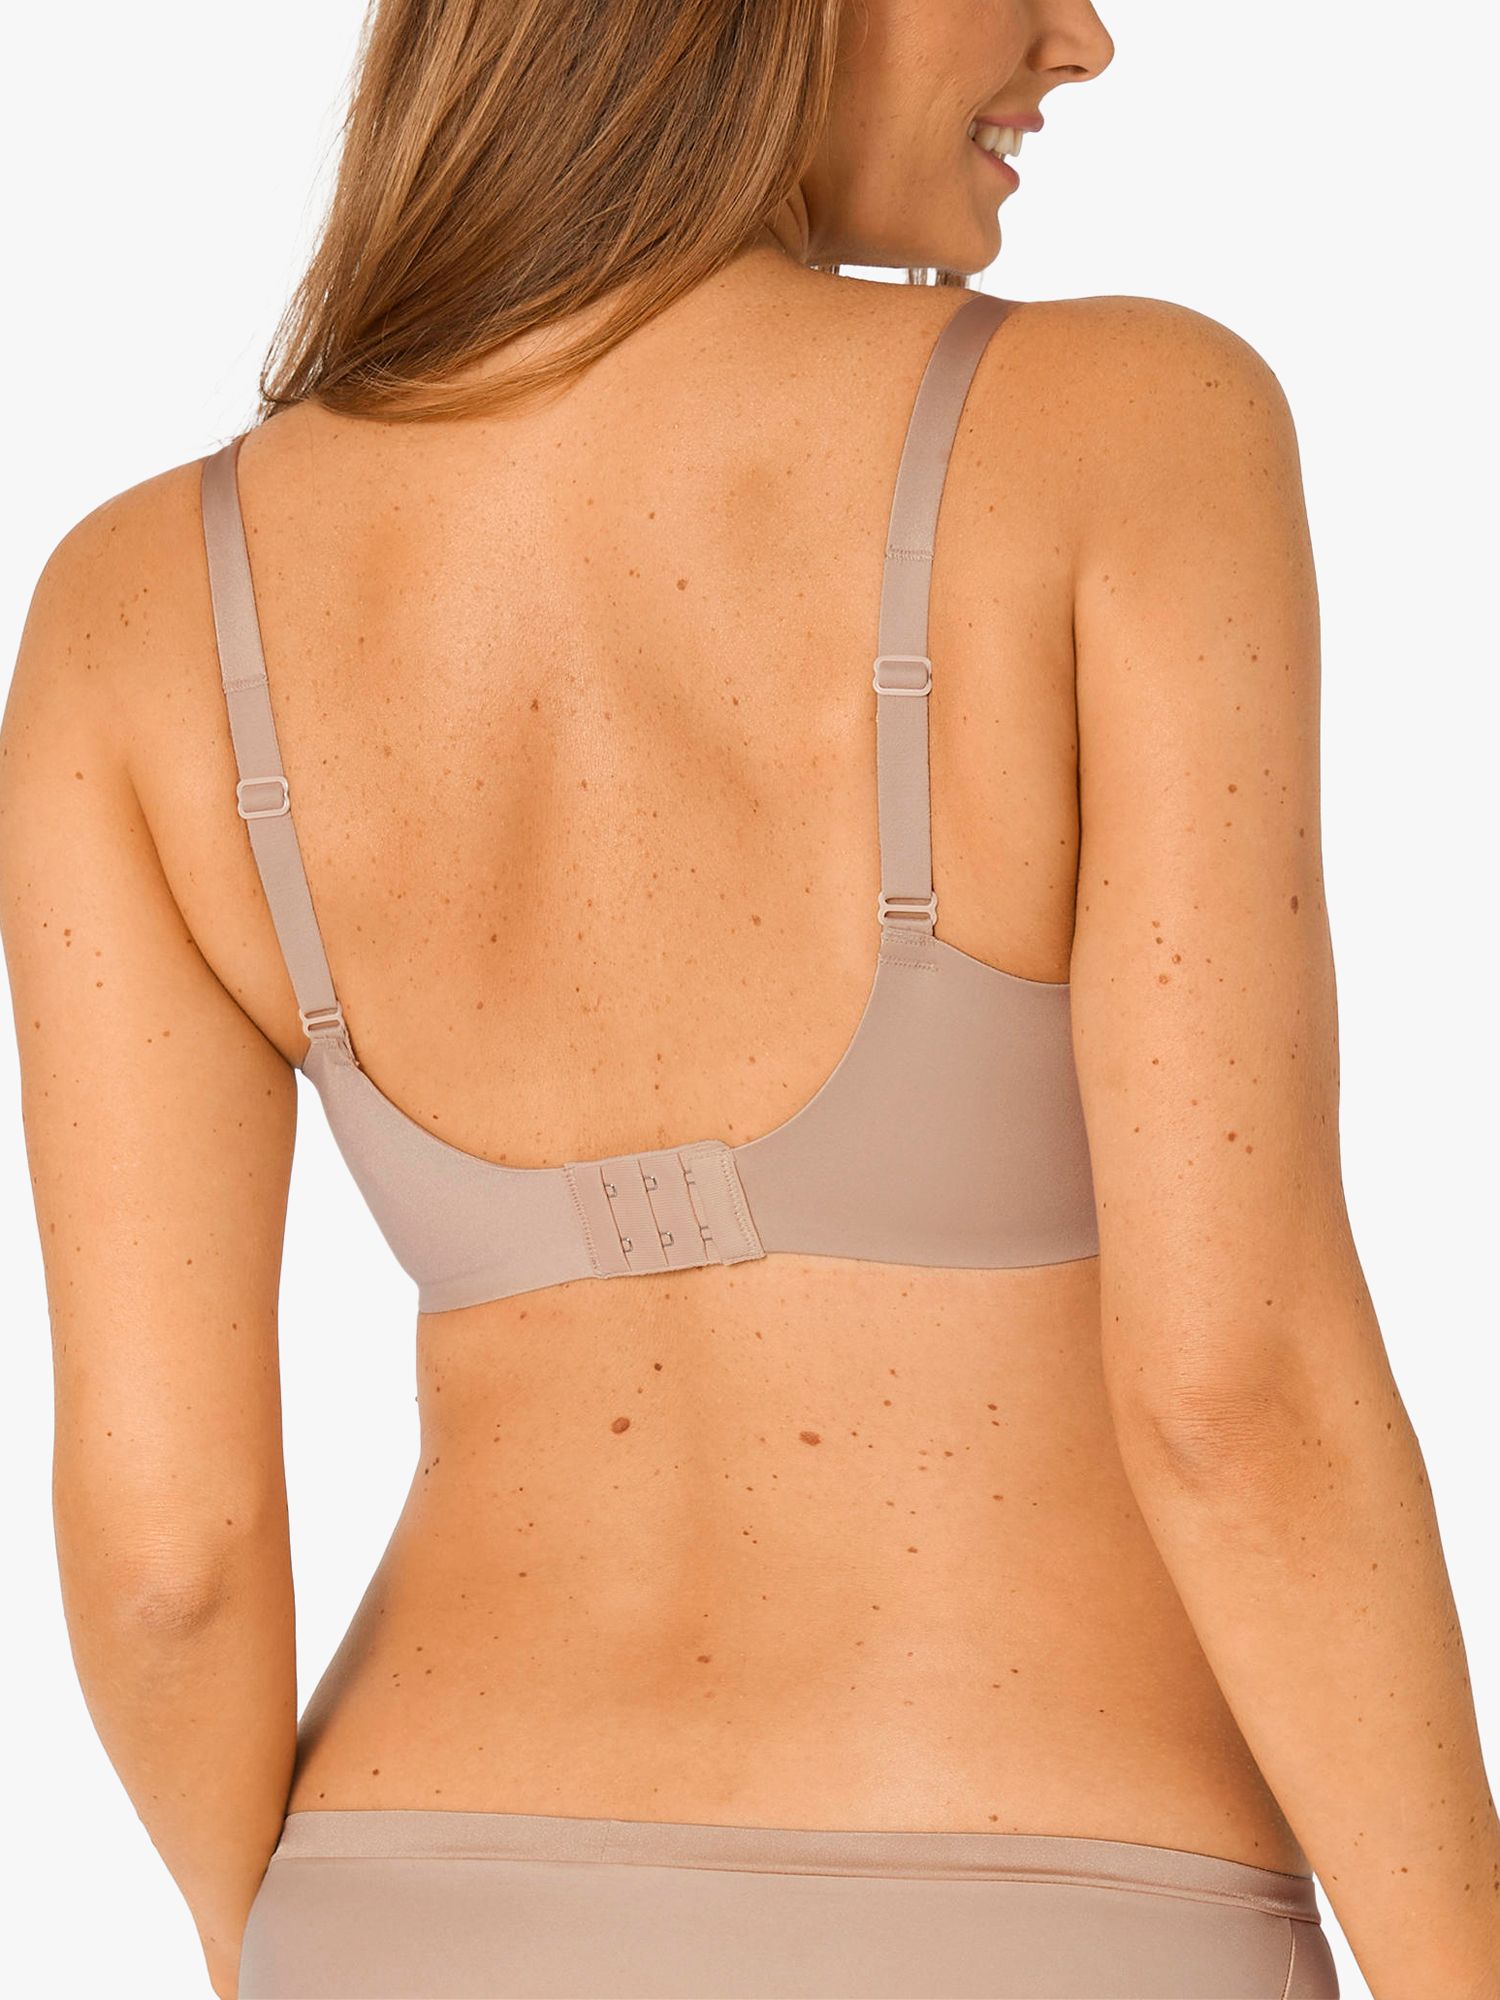 Buy Triumph Body Make Up Soft Touch Bra Online at johnlewis.com